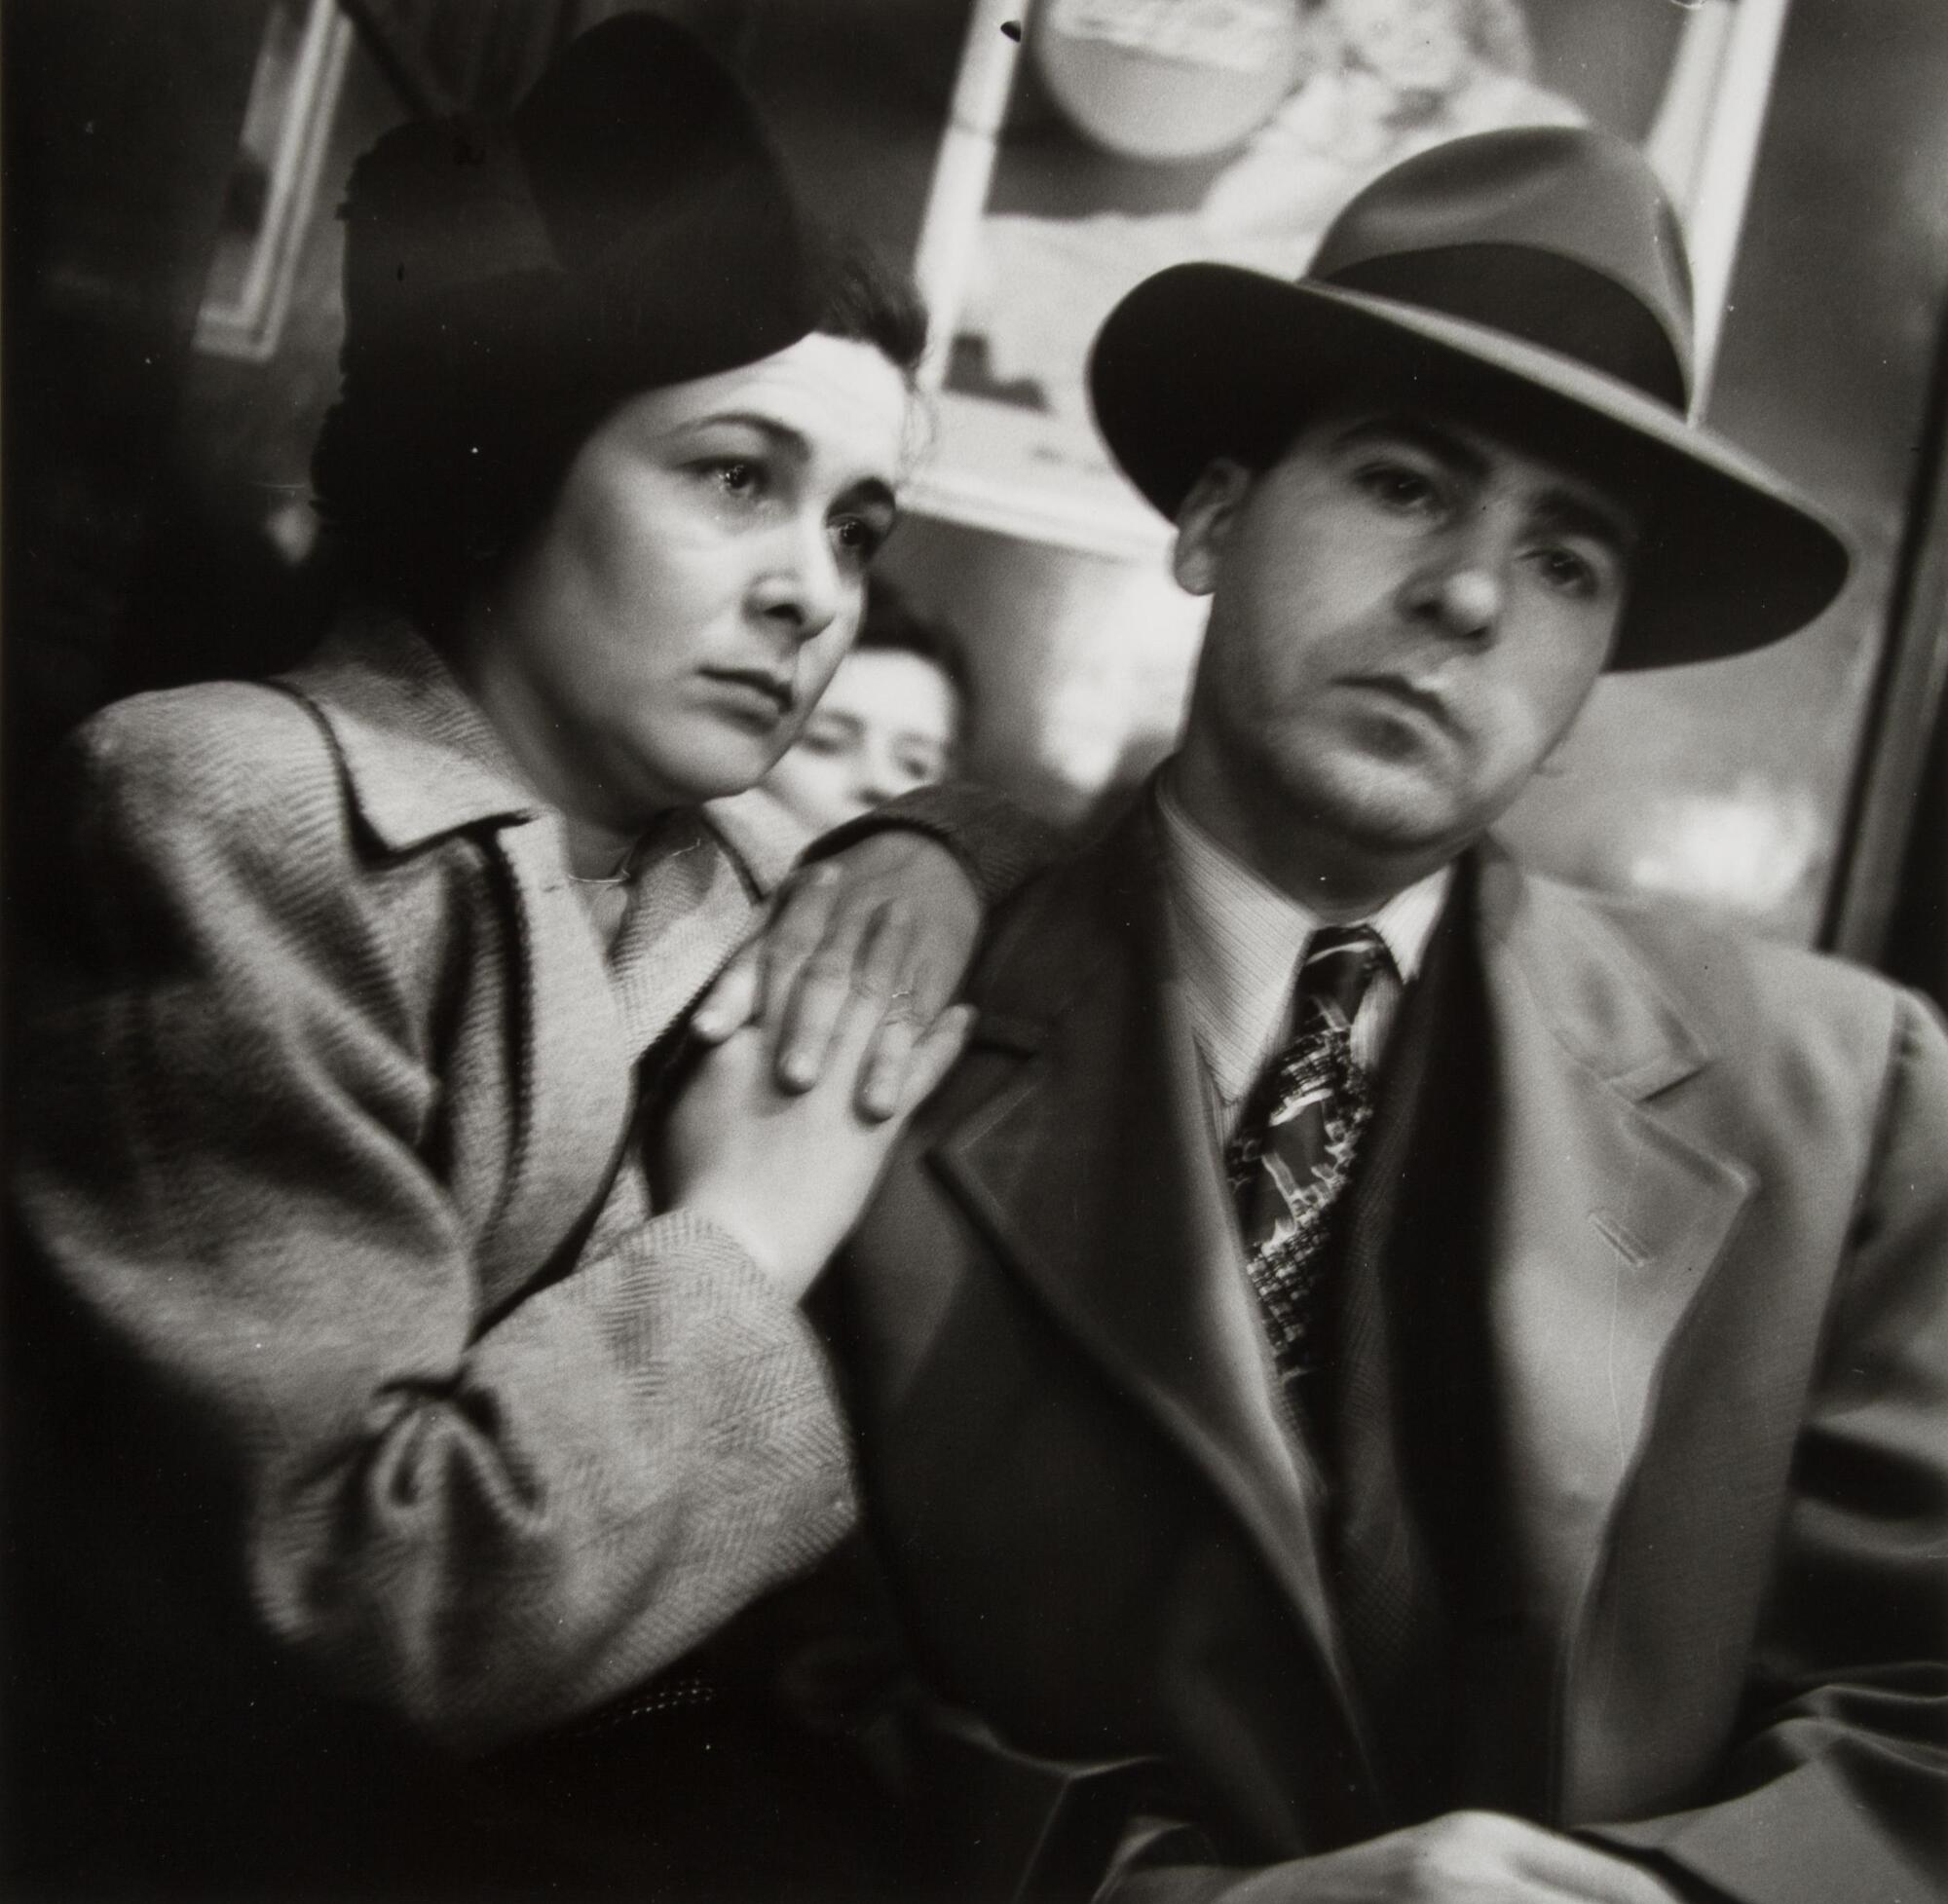 A man and woman seated. Her hands are folded together, resting on his shoulder. He has his hands on his lap, wearing a suit, tie, hat and overcoat. Behind them is a Coke sign that is blurry.